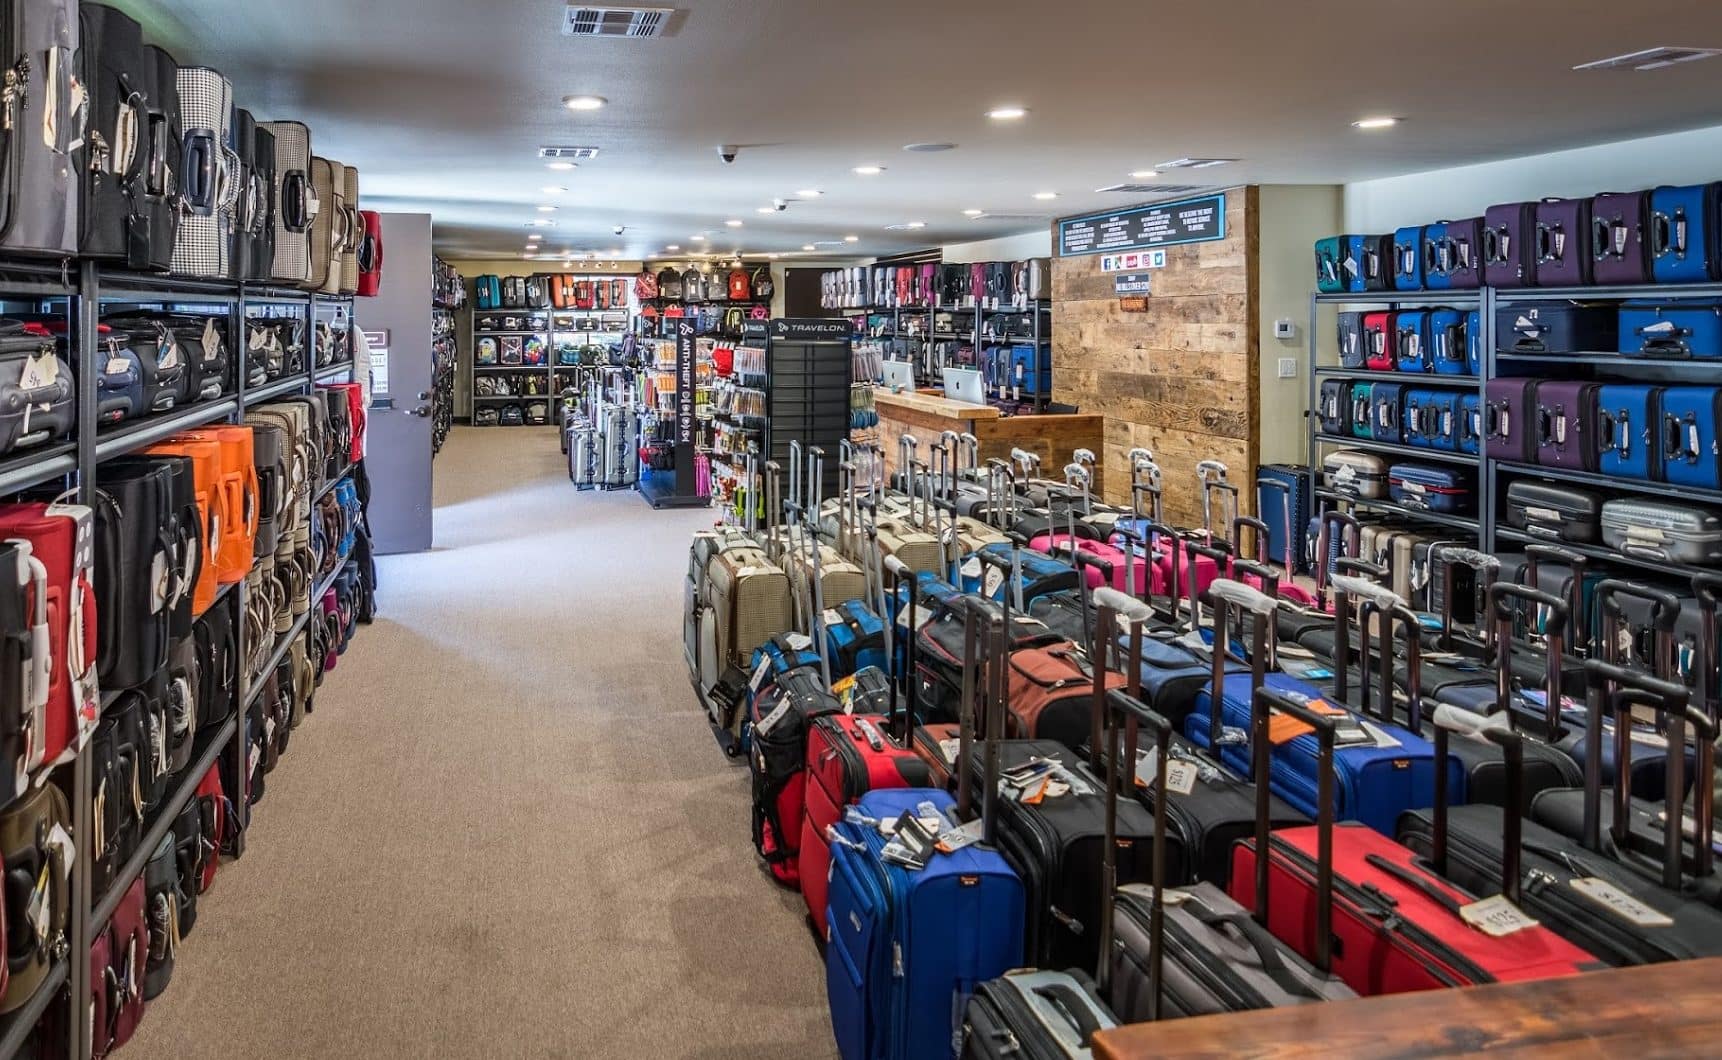 San Diego Discount Luggage Store | SD Luggage